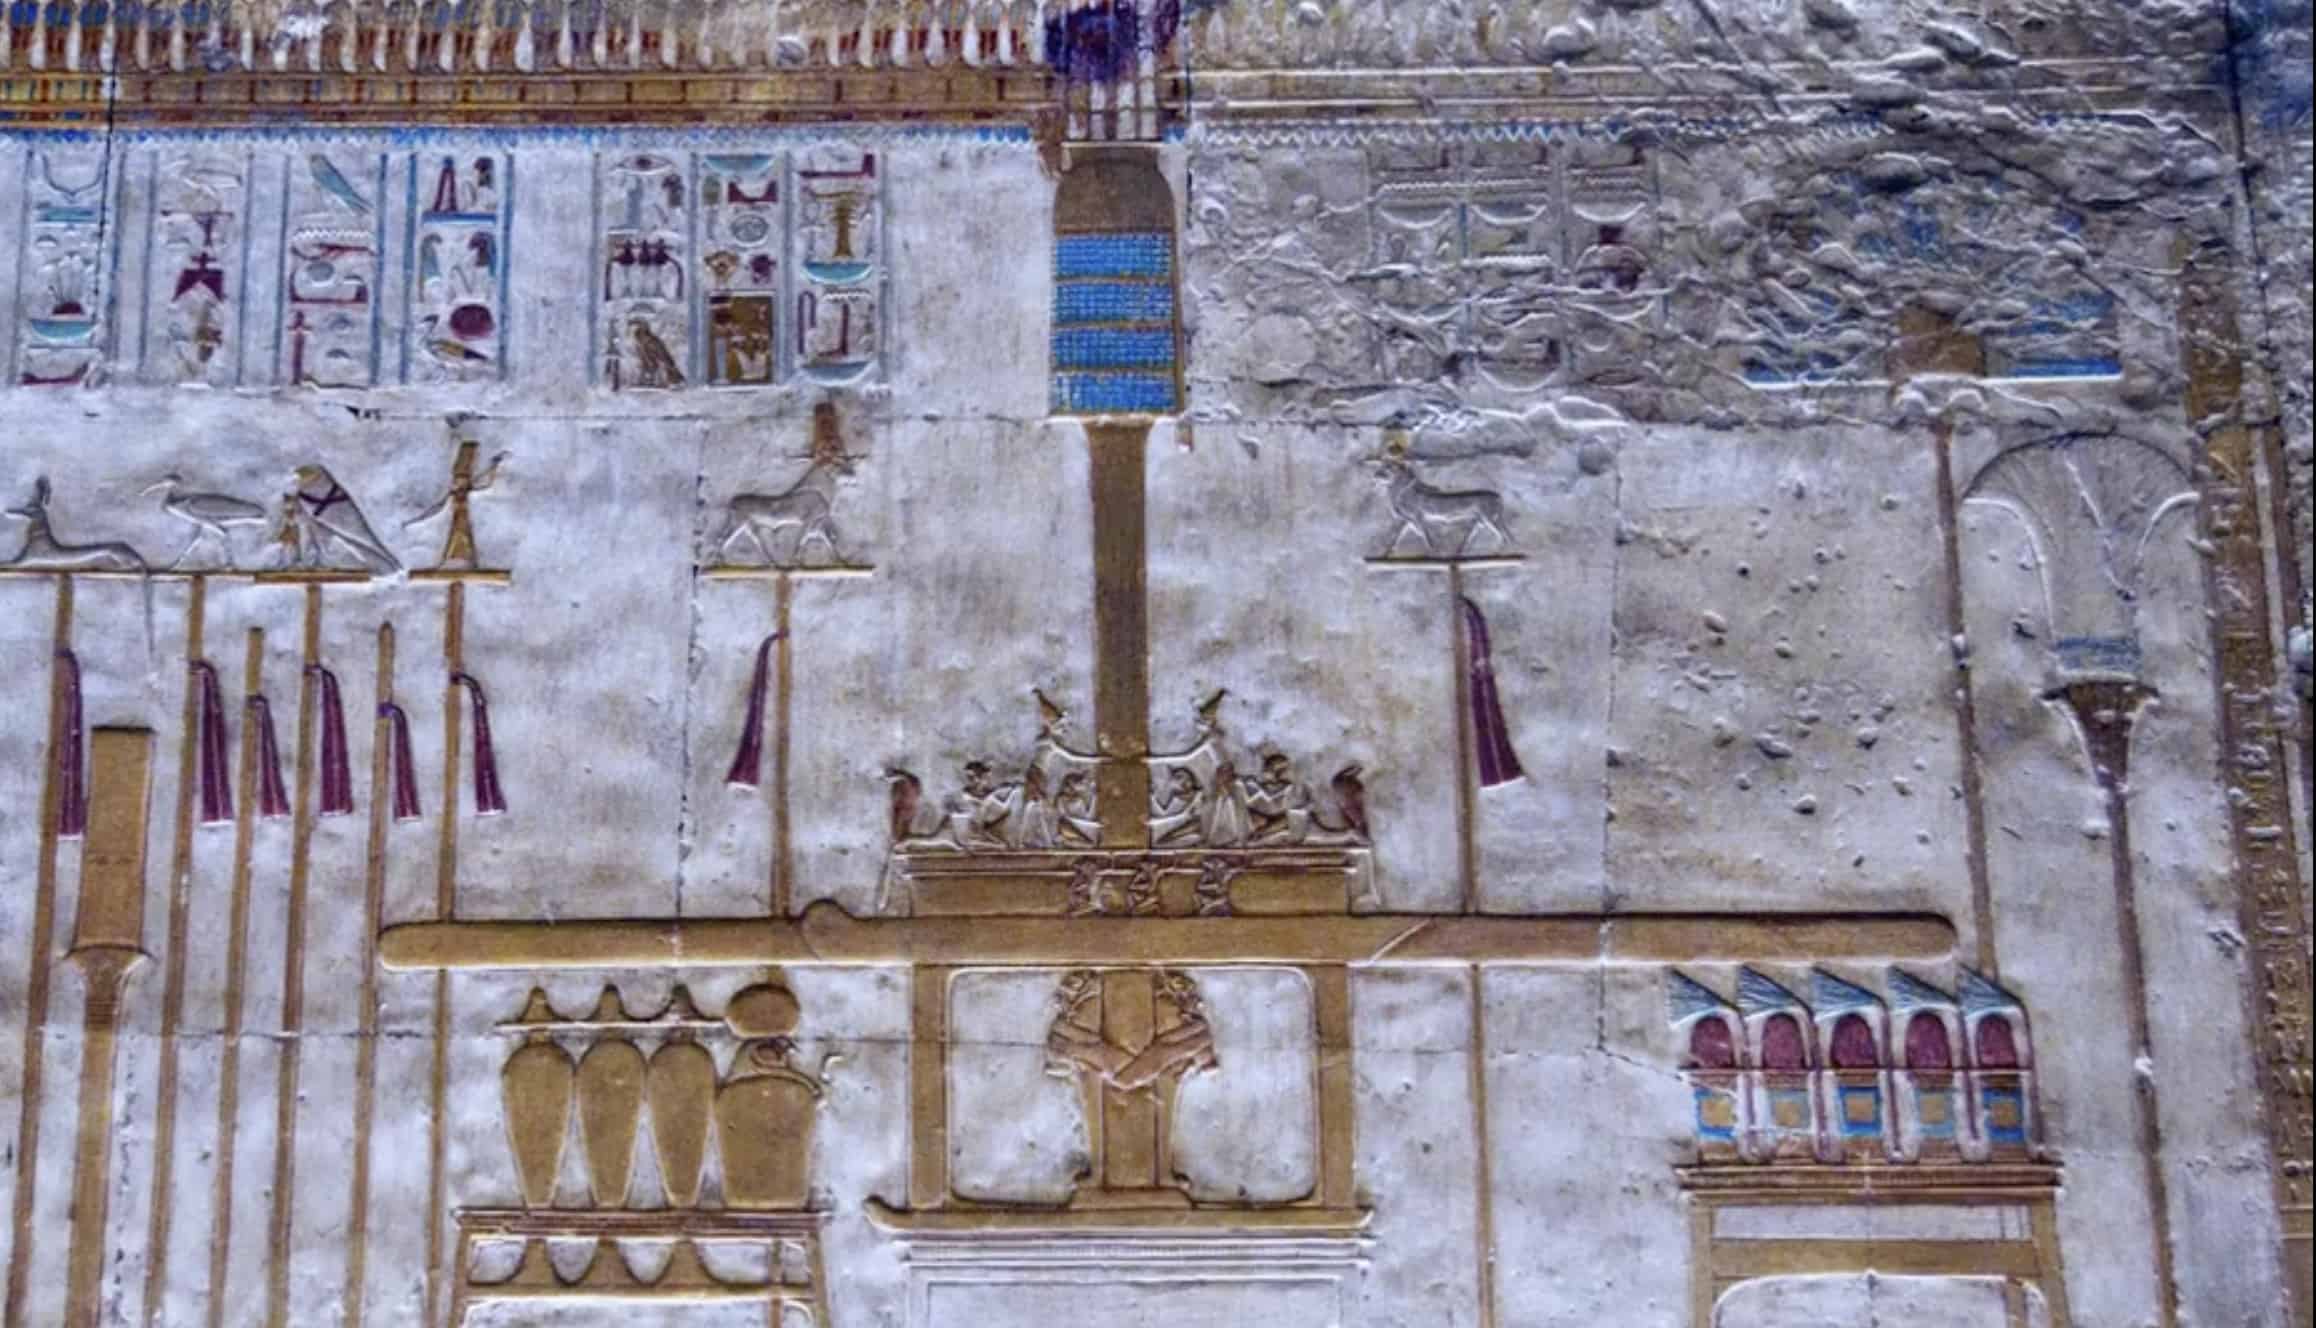 Screen-Shot----at-..-PM - The ‘Osiris device’, the Bark of Horus, and connections to the Ark of the Covenant